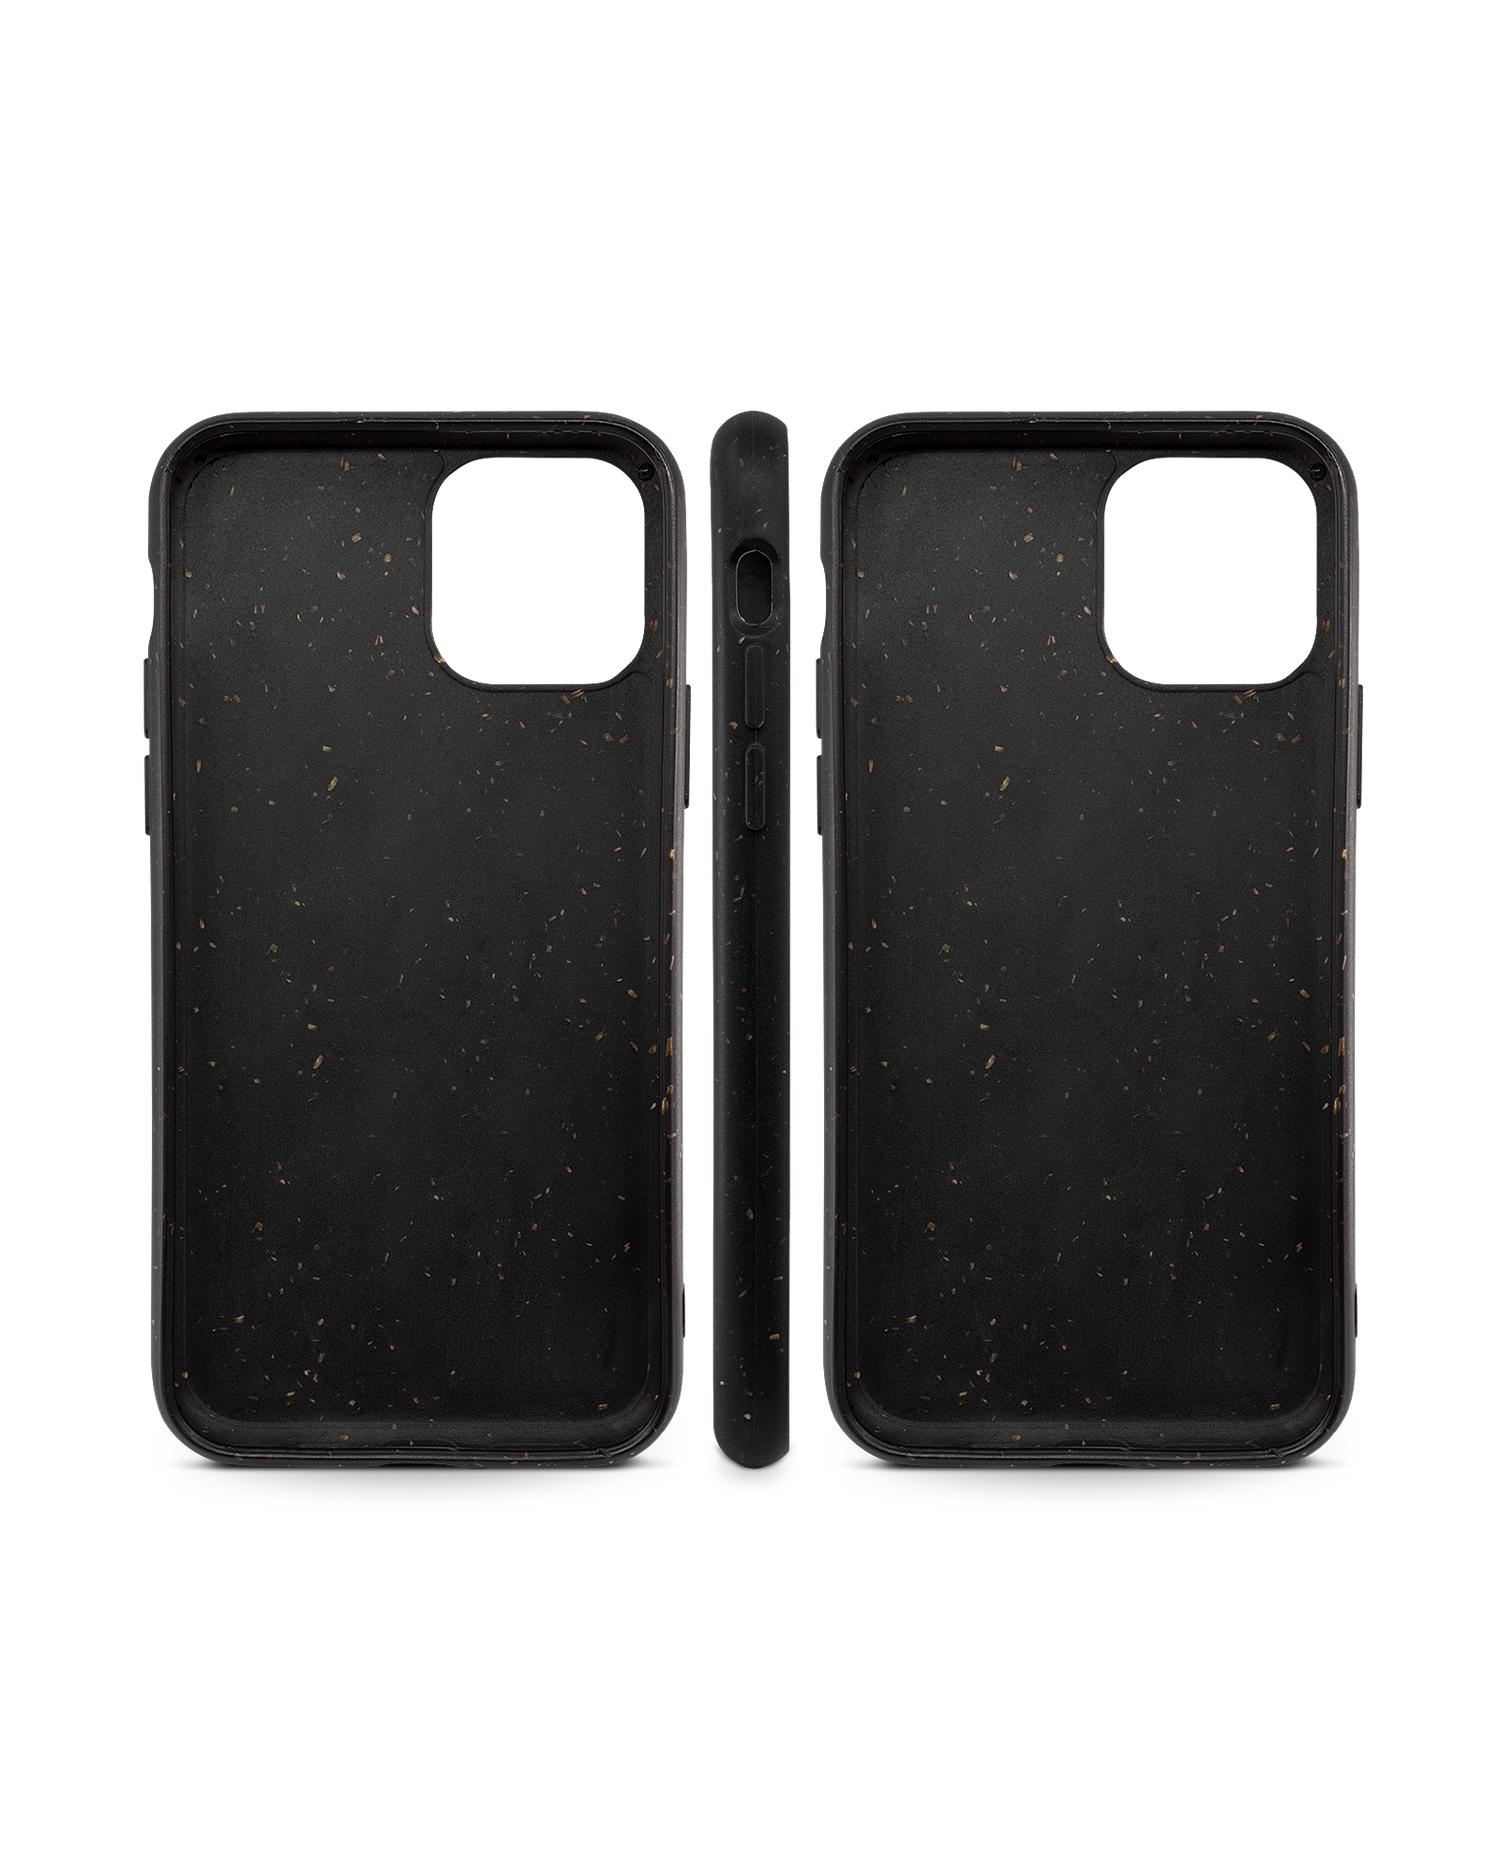 Black Eco-Friendly Phone Case for Apple iPhone 11 Pro: Side Views